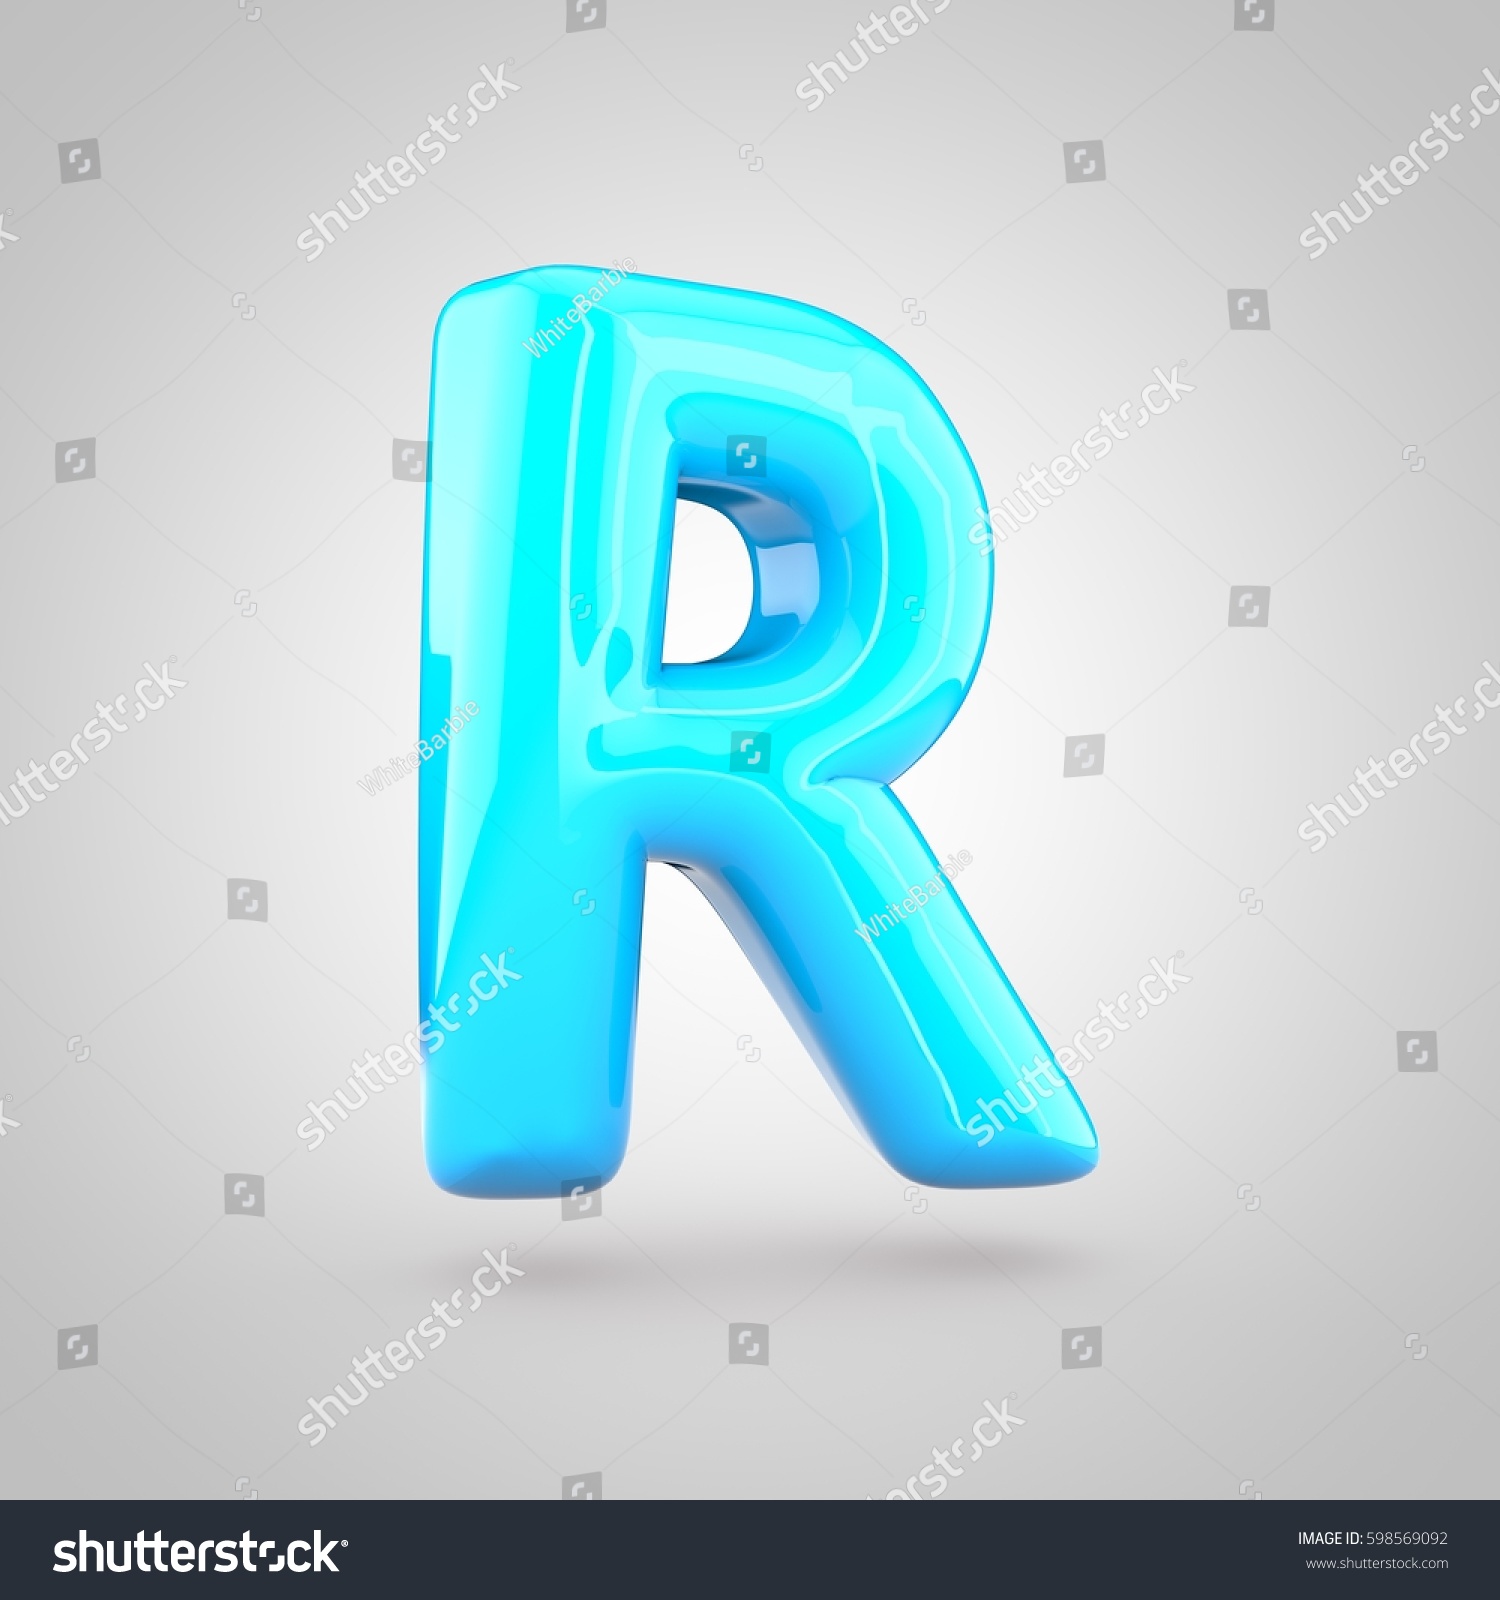 Royalty Free Stock Illustration Of Glossy Blue Paint Letter R